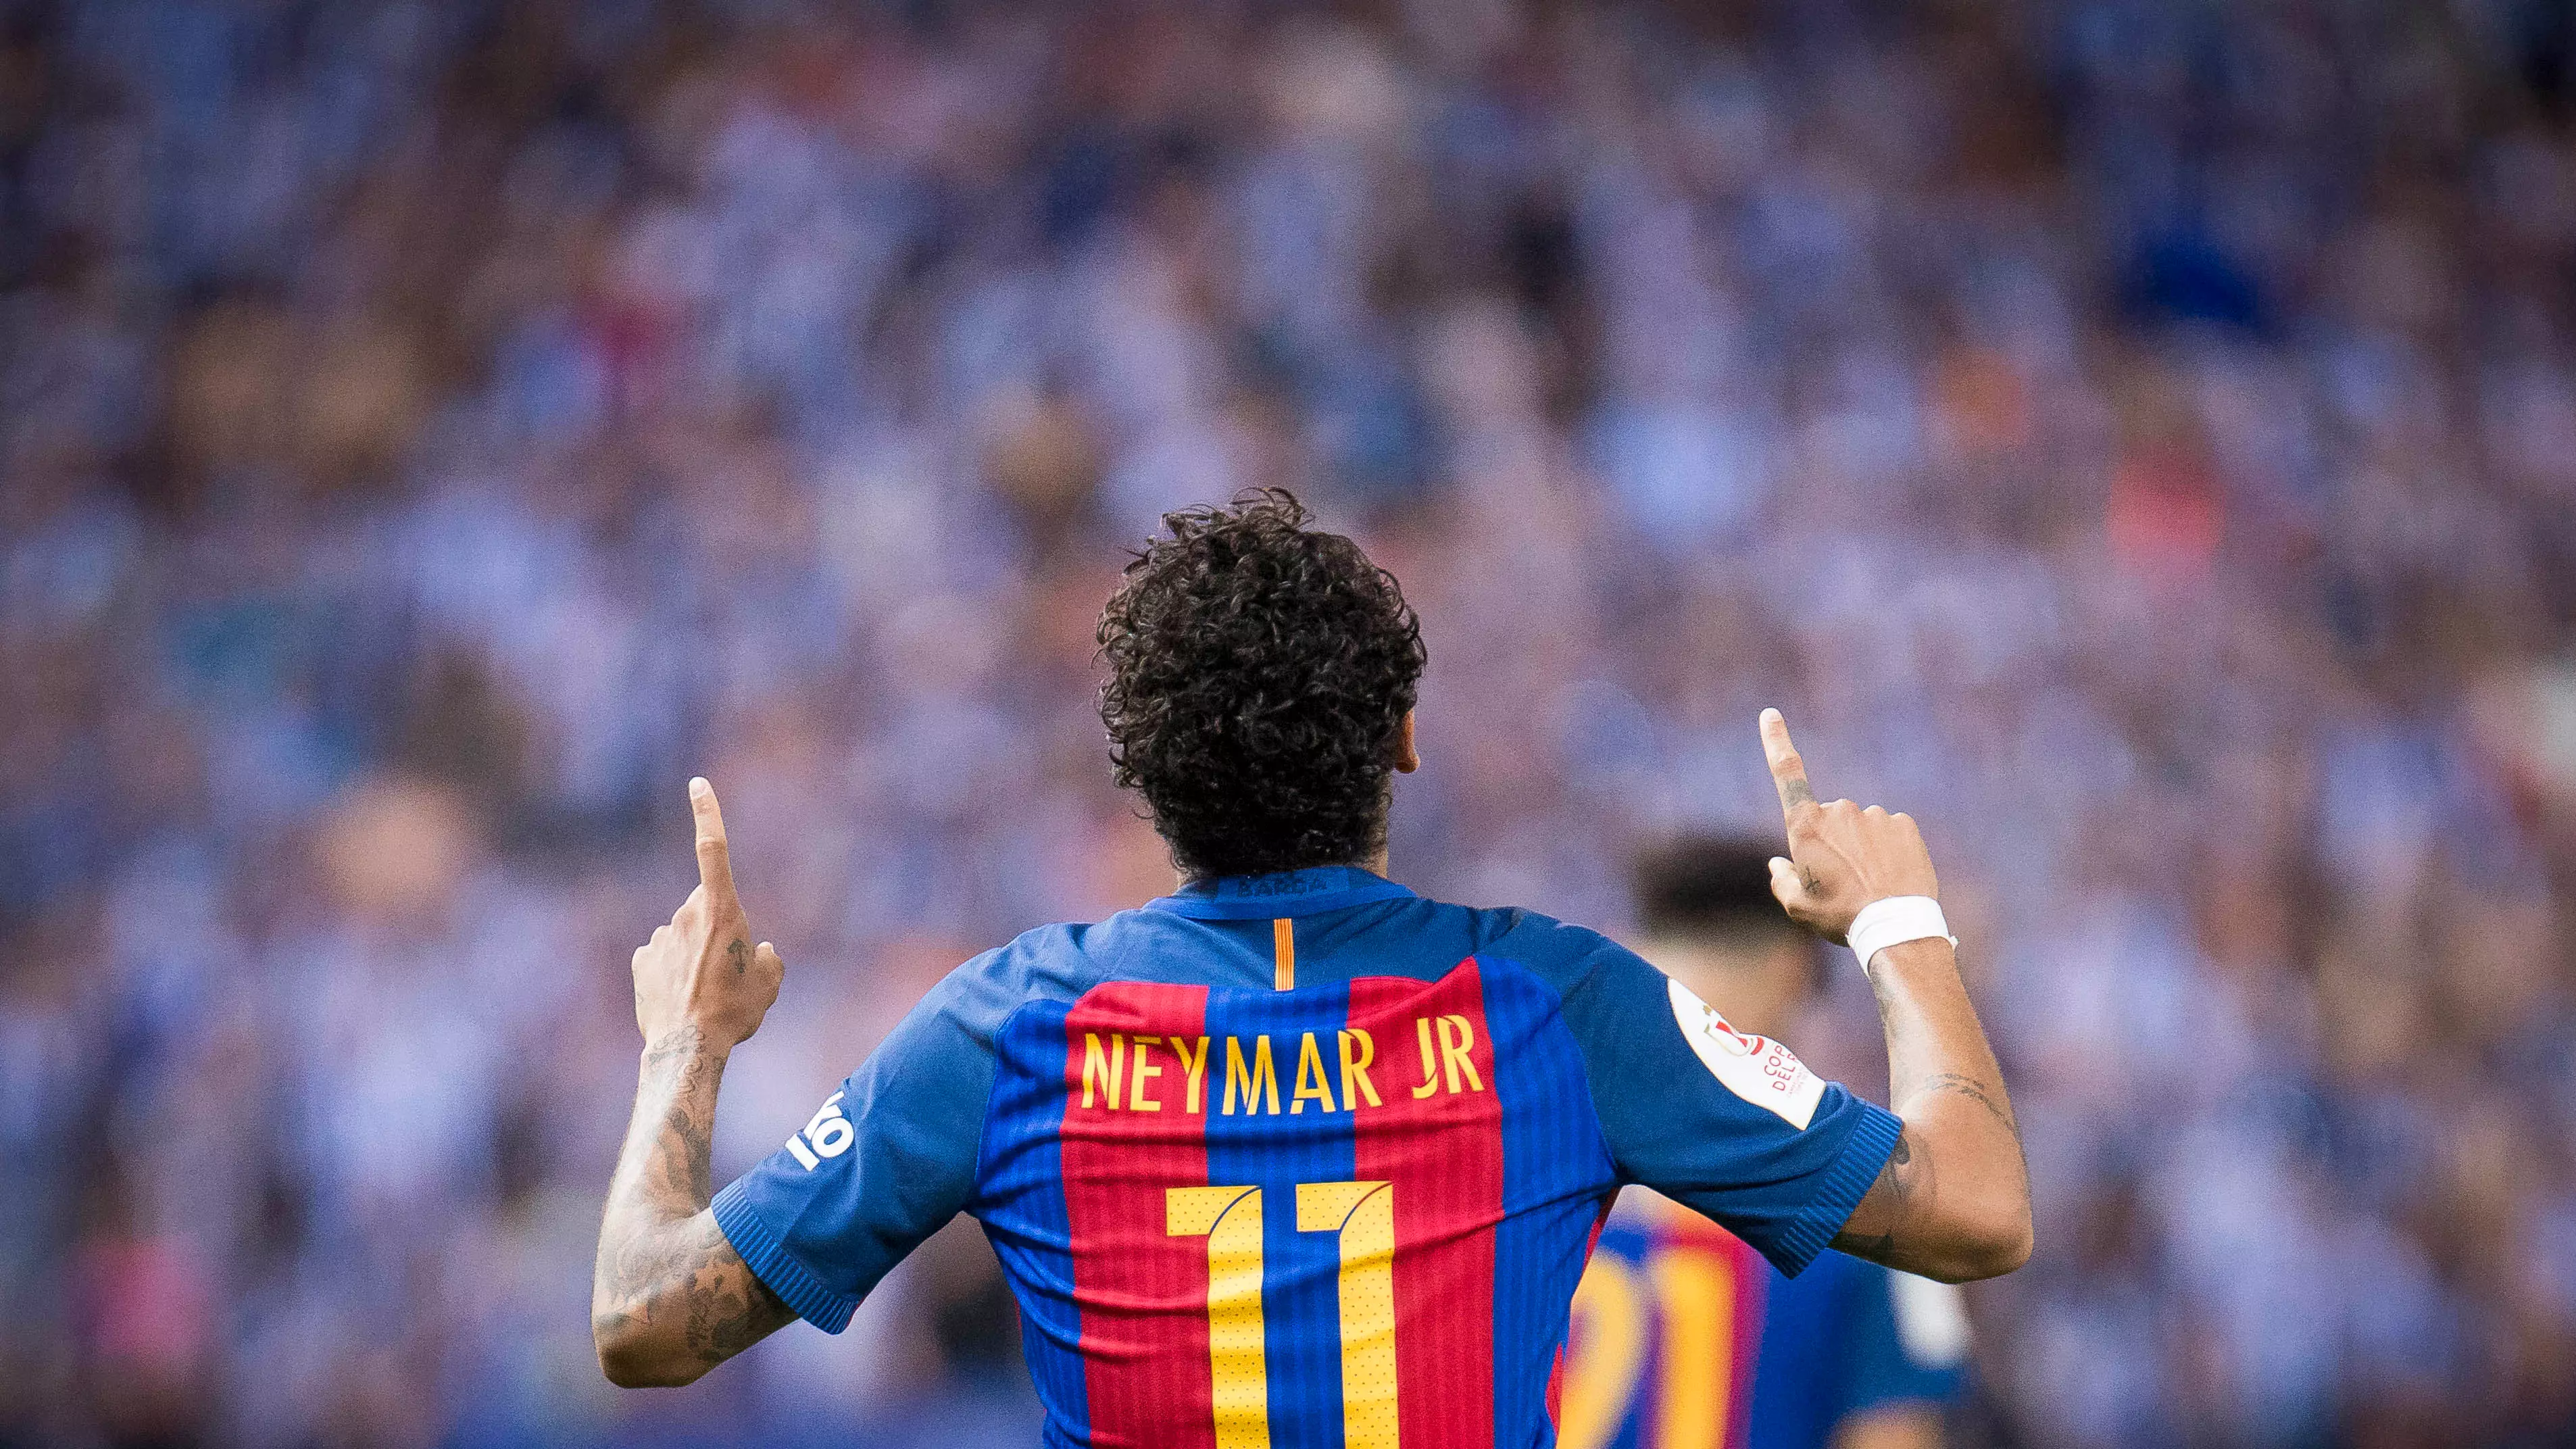 The Numbers Behind Neymar's PSG Transfer Are Crazy